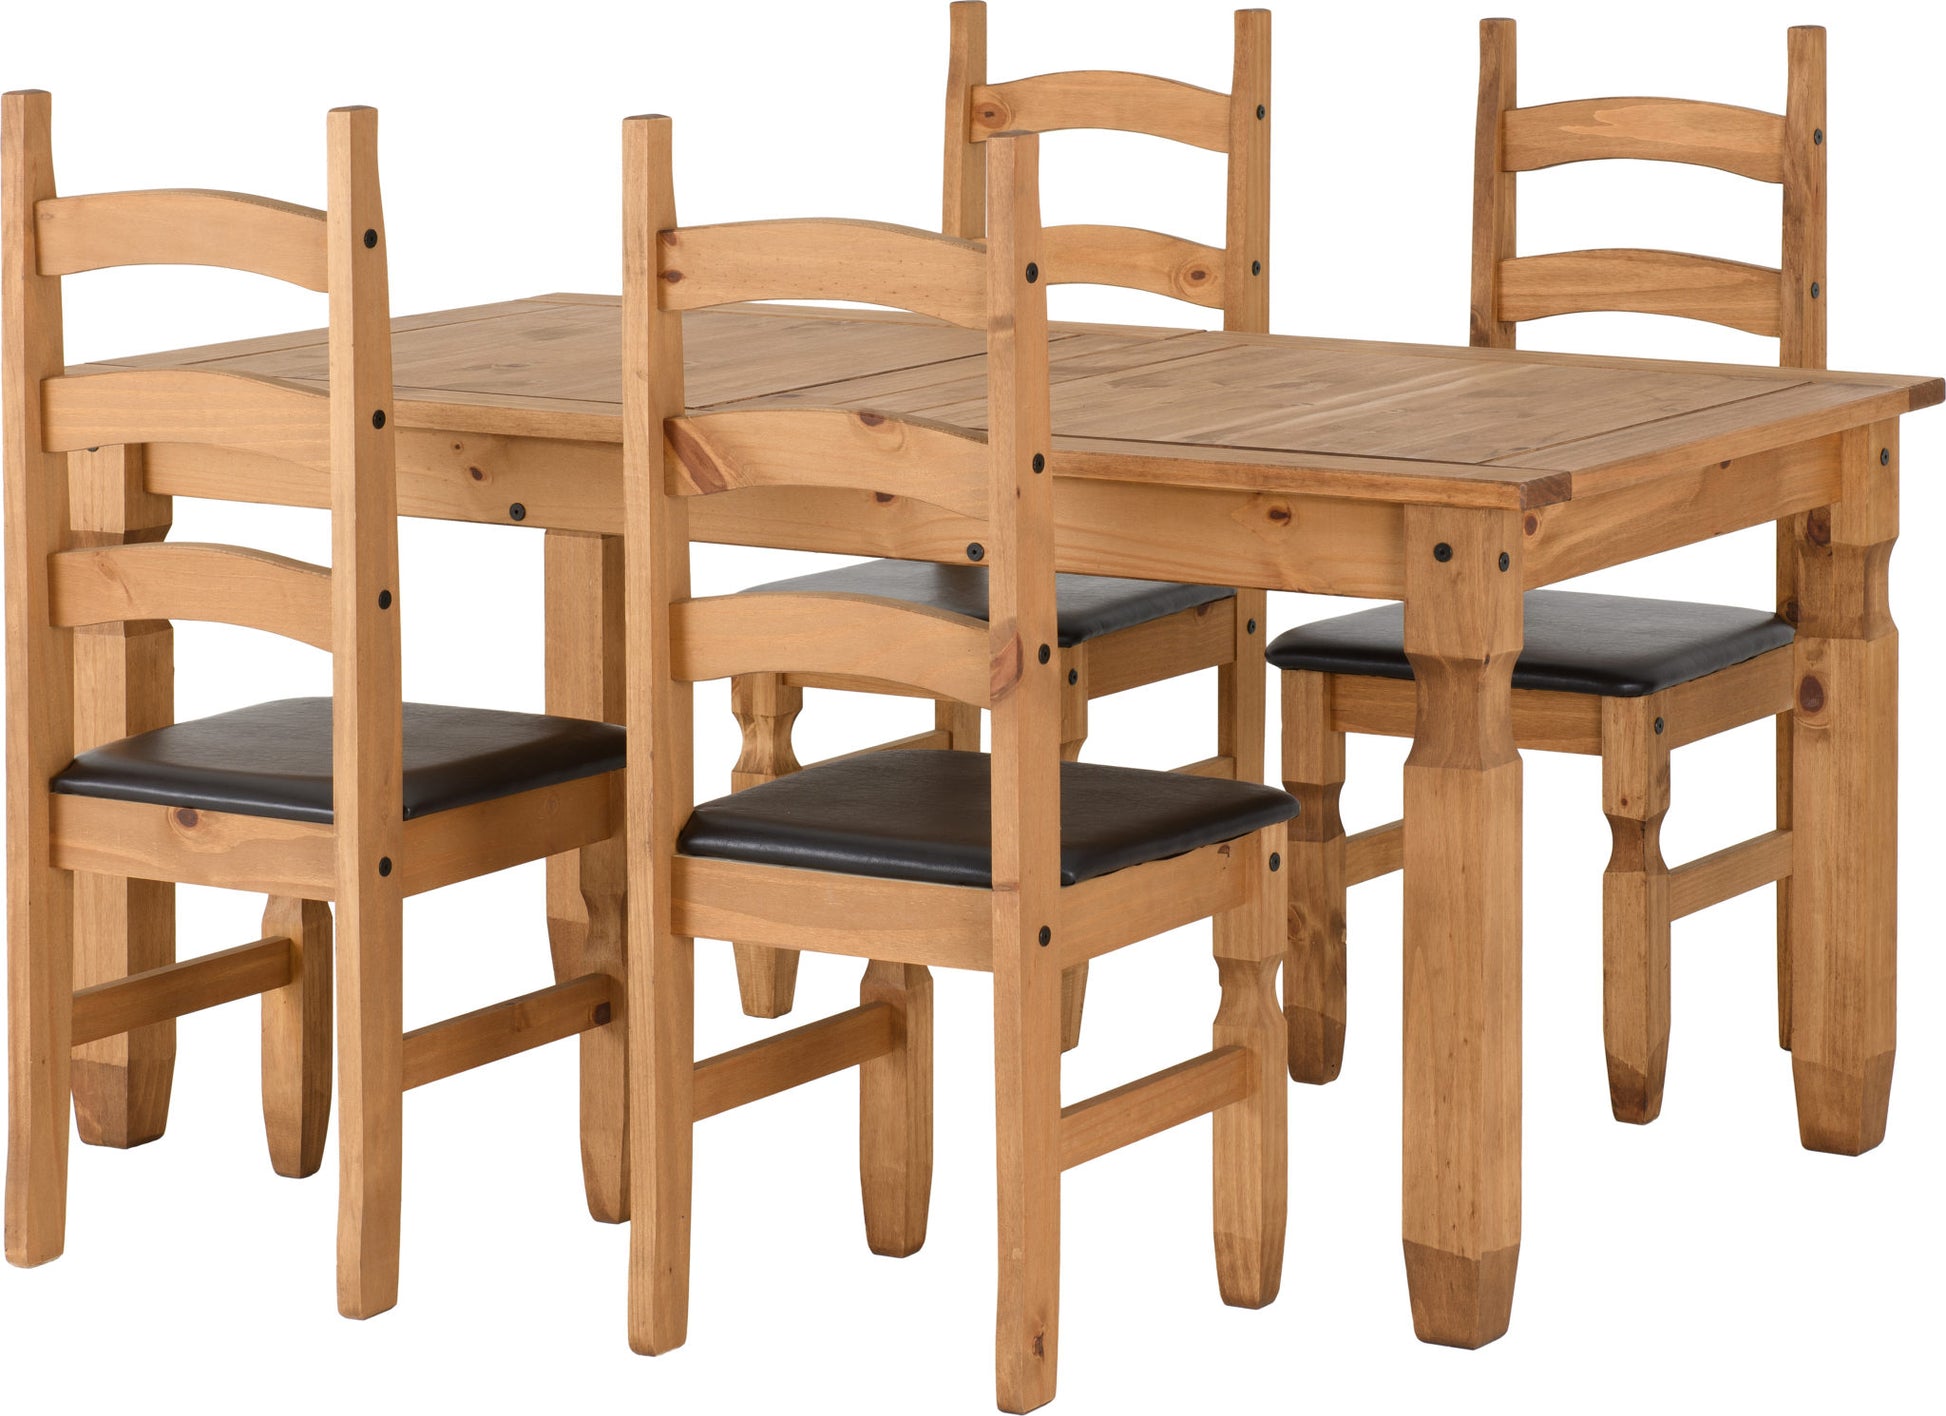 Corona Extending Dining Set(4 Chairs) - Distressed Waxed Pine/Brown Faux Leather